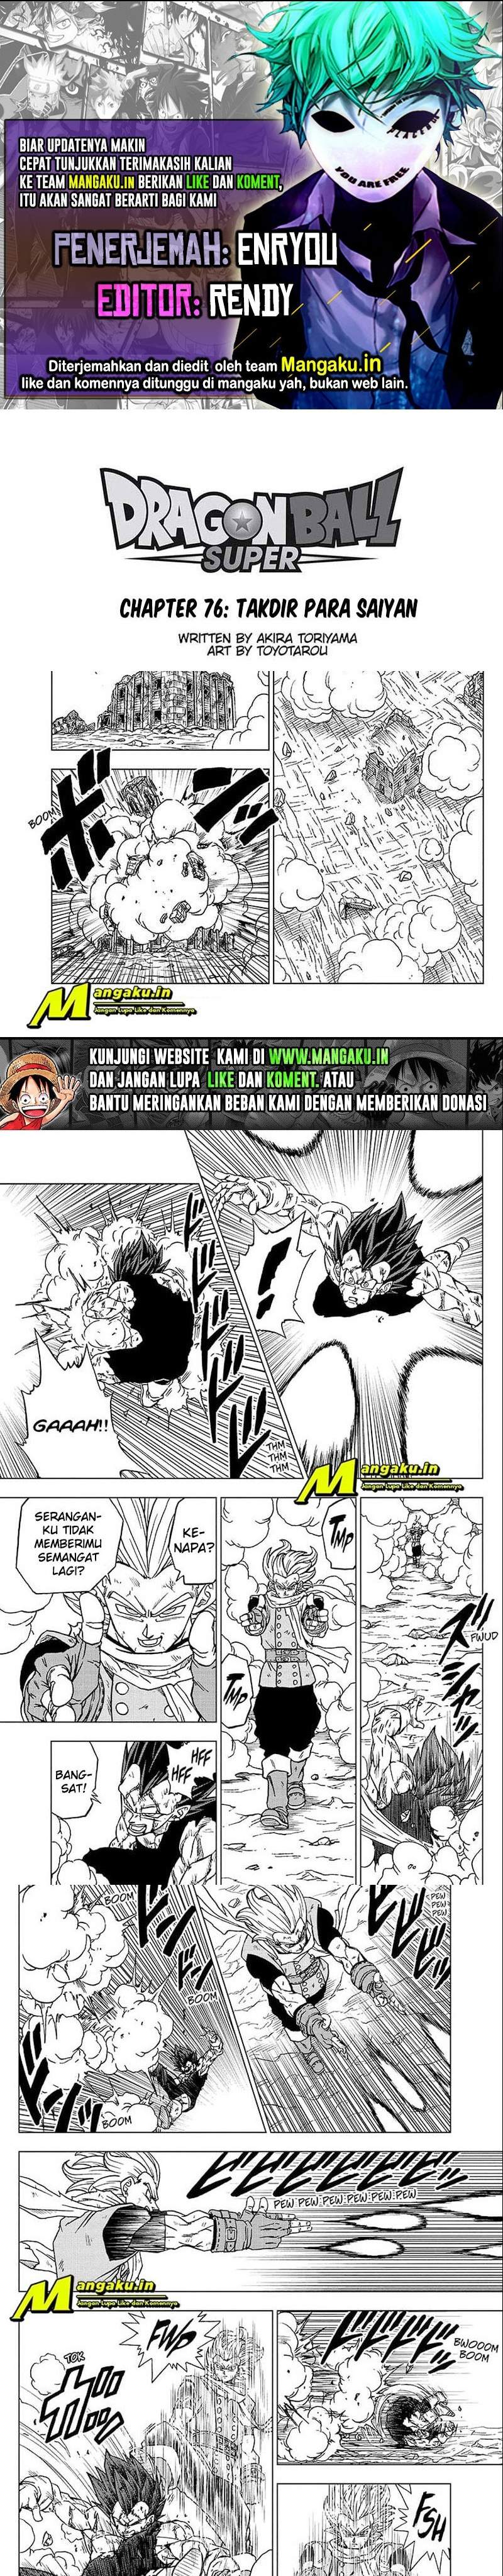 Dragon Ball Super: Chapter 76.1 - Page 1